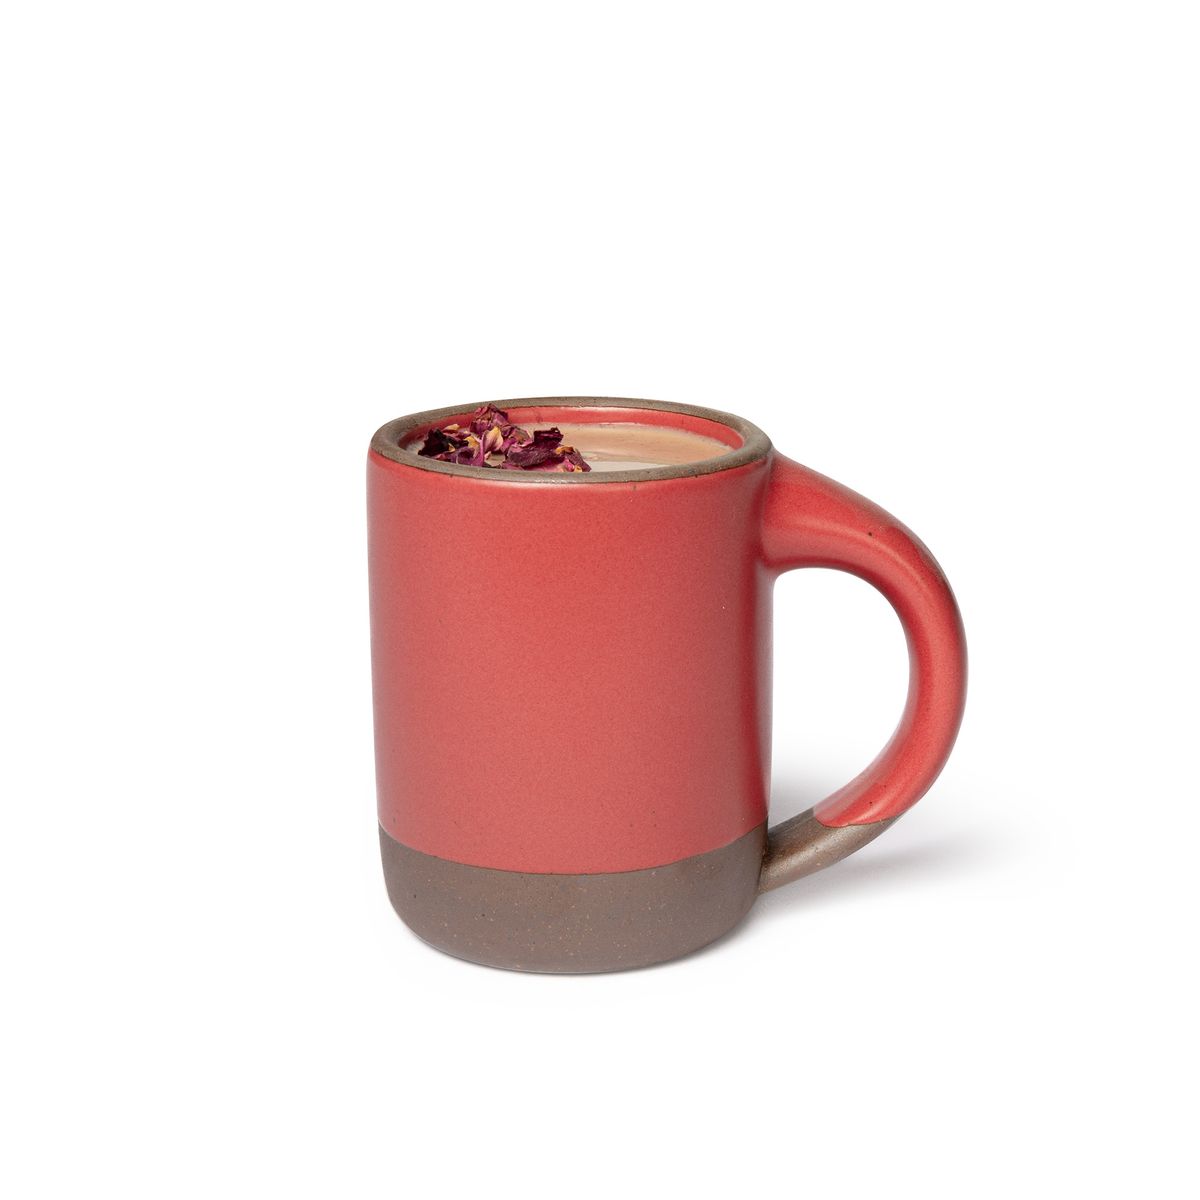 A medium sized ceramic mug with handle in a bold red color featuring iron speckles and unglazed rim and bottom base, filled with hot chocolate